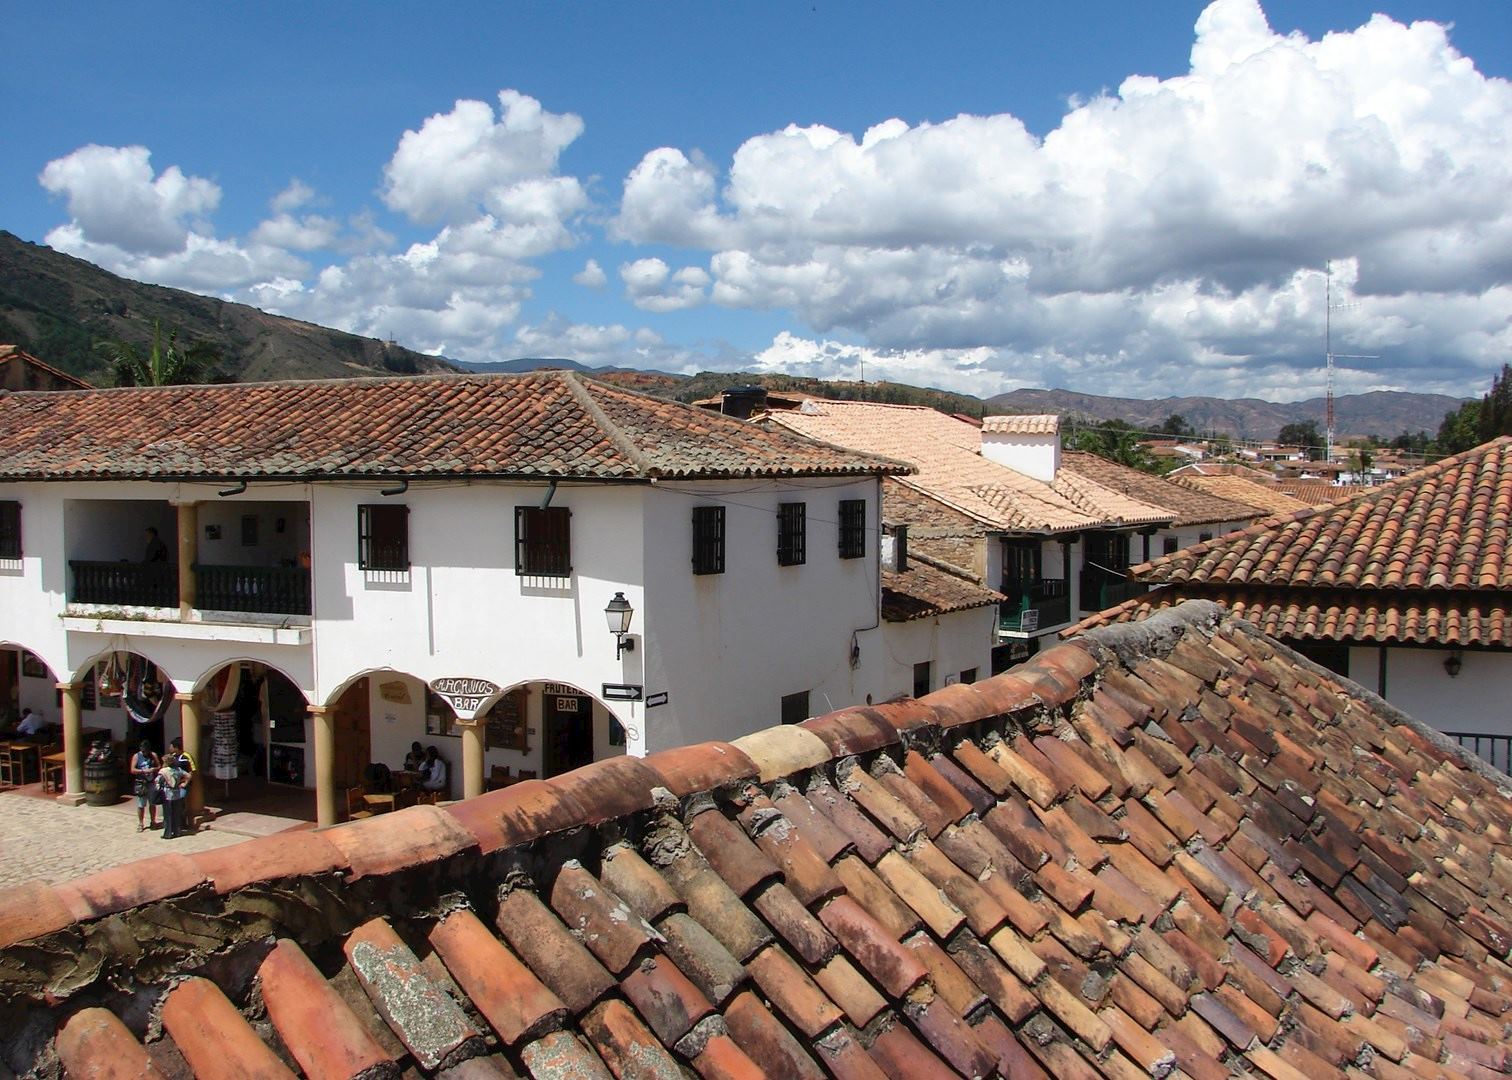 Tailor-made vacations to Colombia | Audley Travel